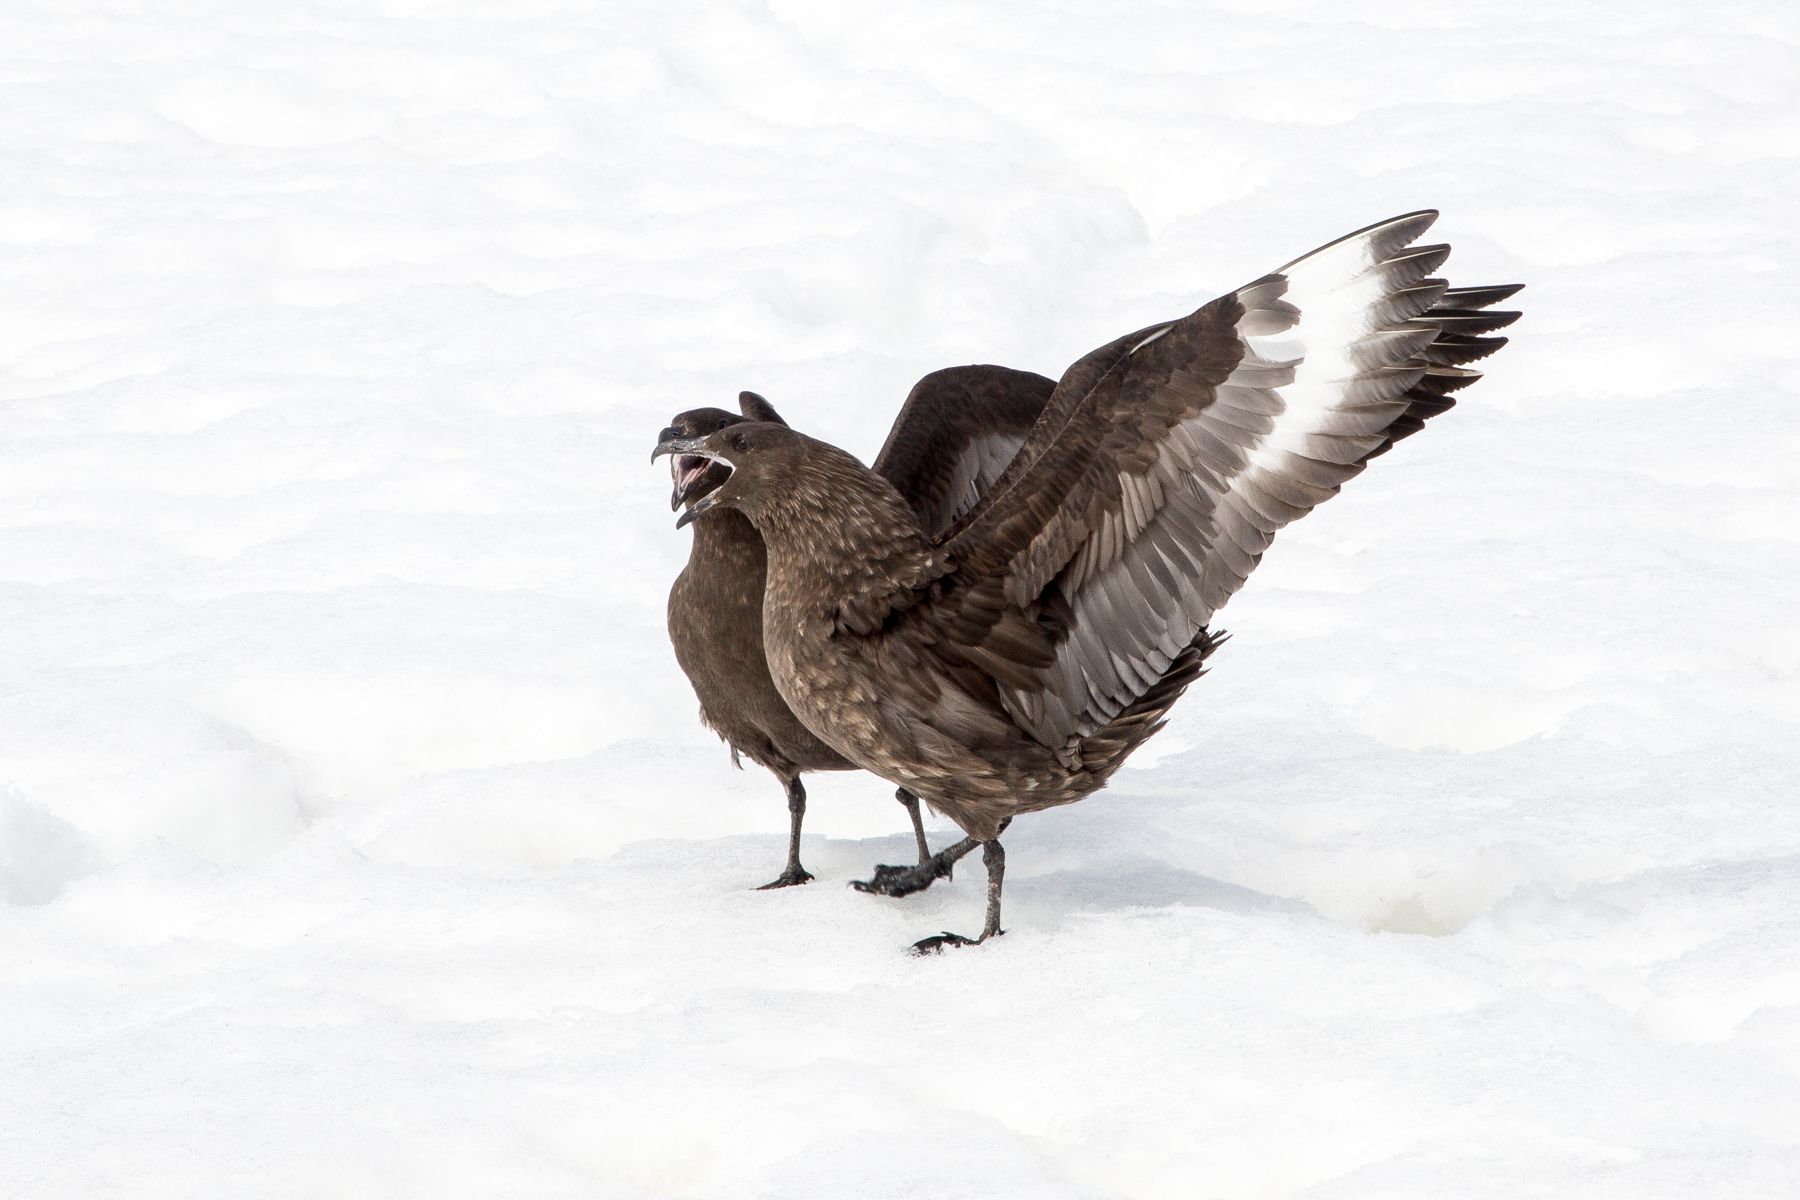 Brown Skuas often greet each other with calls and wing extending